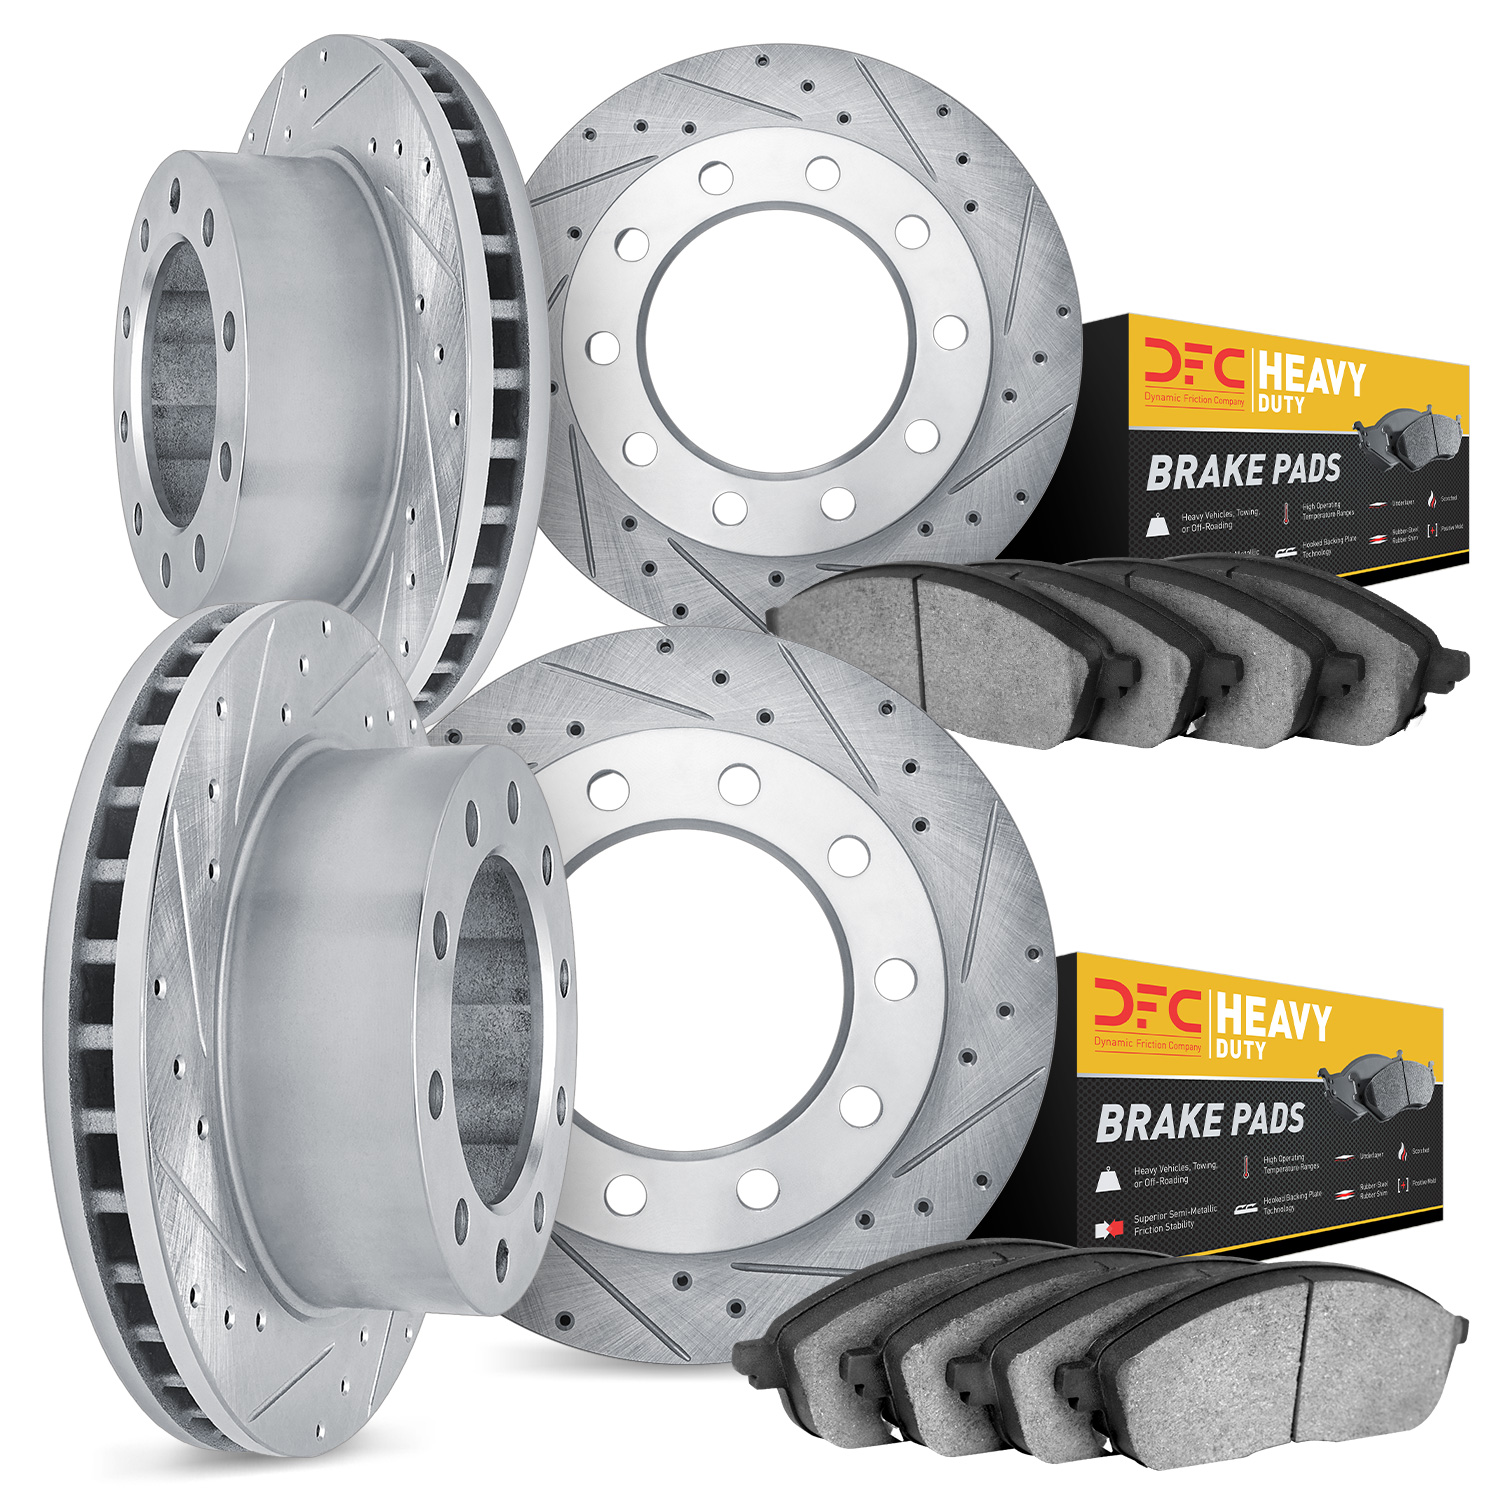 7204-99072 Drilled/Slotted Rotors w/Heavy-Duty Brake Pads Kit [Silver], 2002-2005 Ford/Lincoln/Mercury/Mazda, Position: Front an